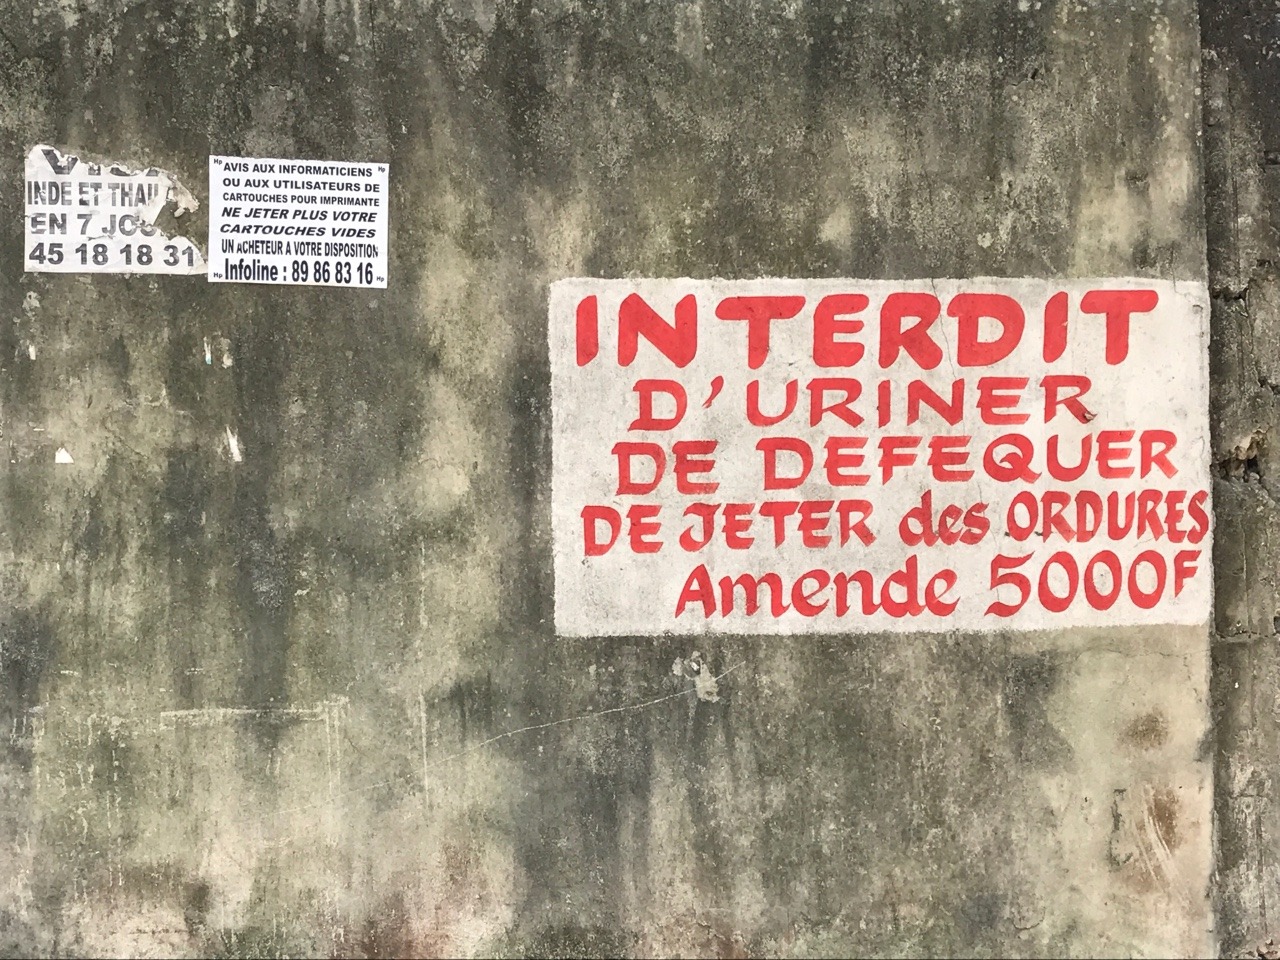 Sign in Plateau, Abidjan
“Prohibited: Urinating Defecating Littering 5000F Fine” 12 February 2017